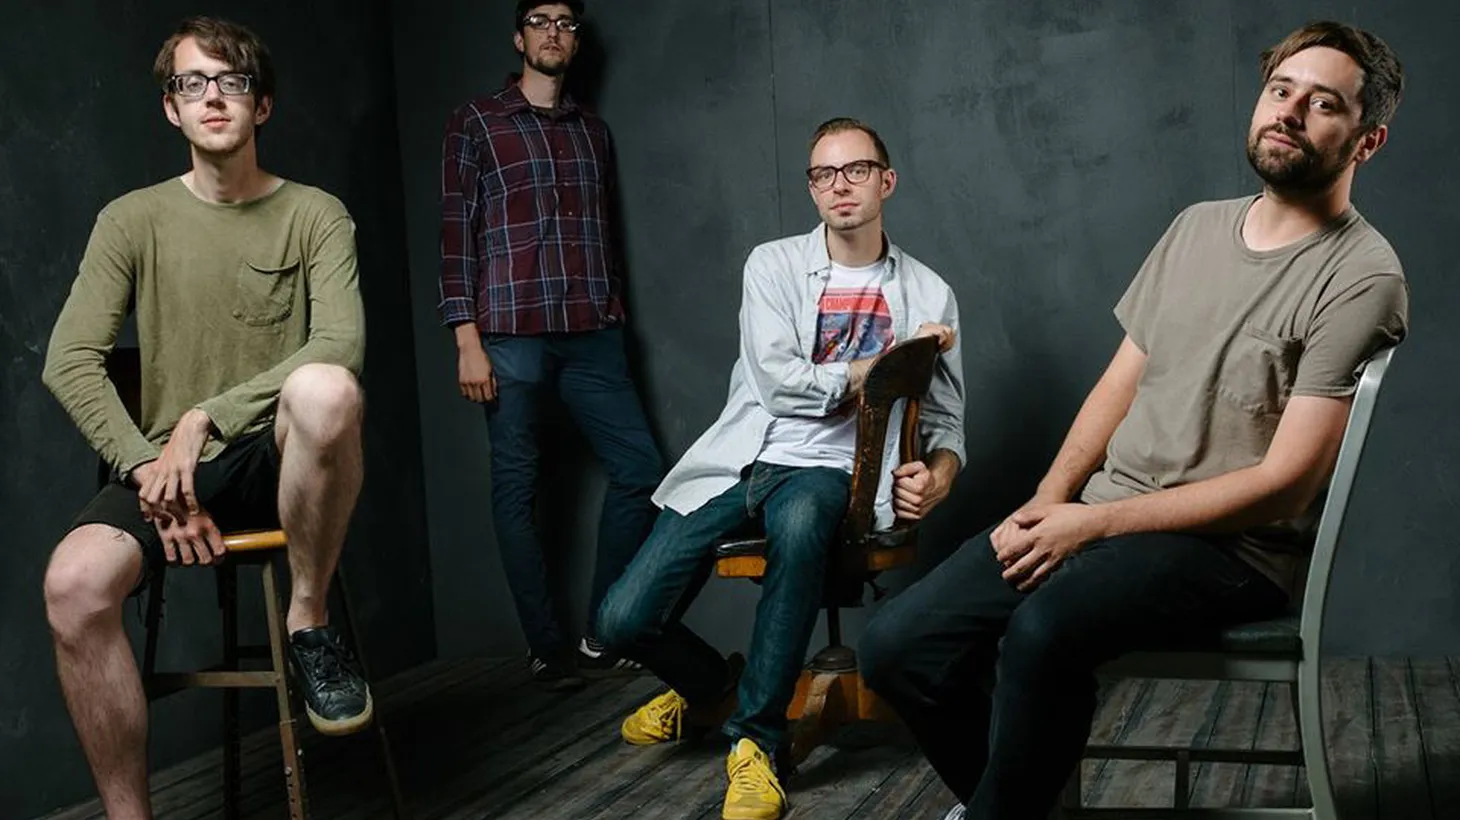 Cloud Nothings started as a solo project from a teenage Dylan Baldi. Now, the rock outfit's on its fourth full length.